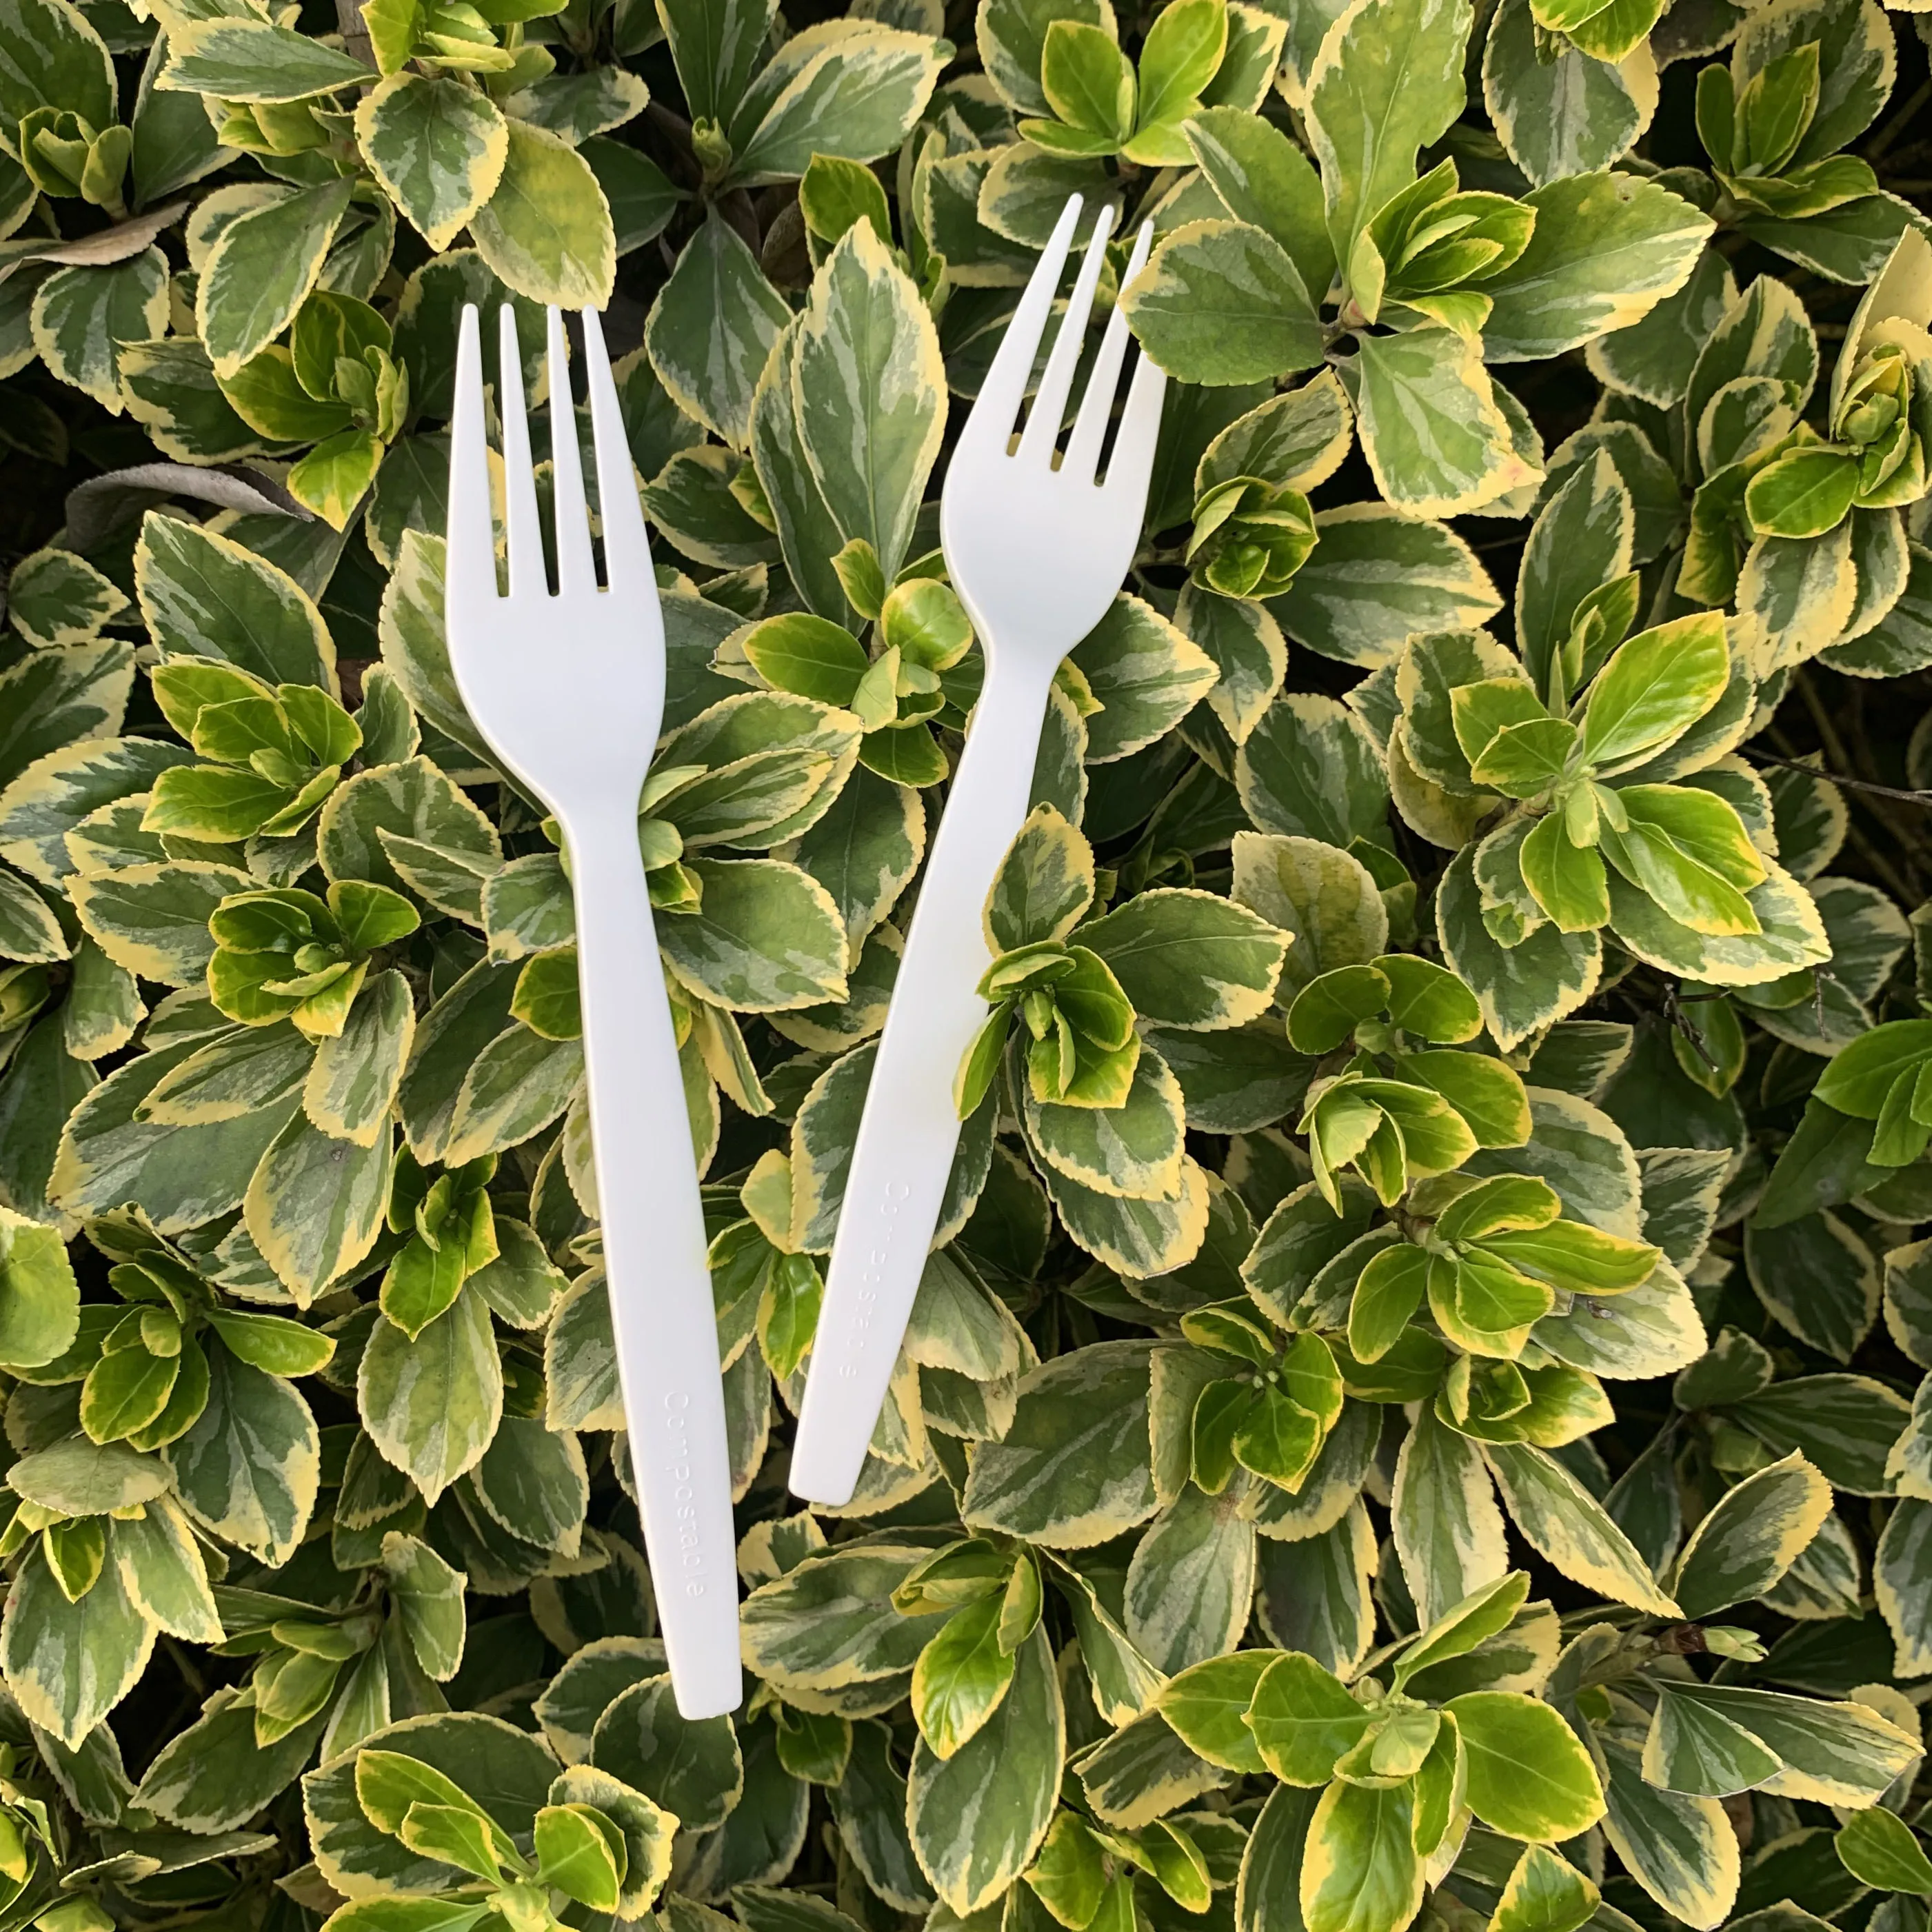 Biopoly Individual Bag Packaging Eco Friendly Disposable Biodegradable Plastic Utensils Compostable PLA Cutlery Set